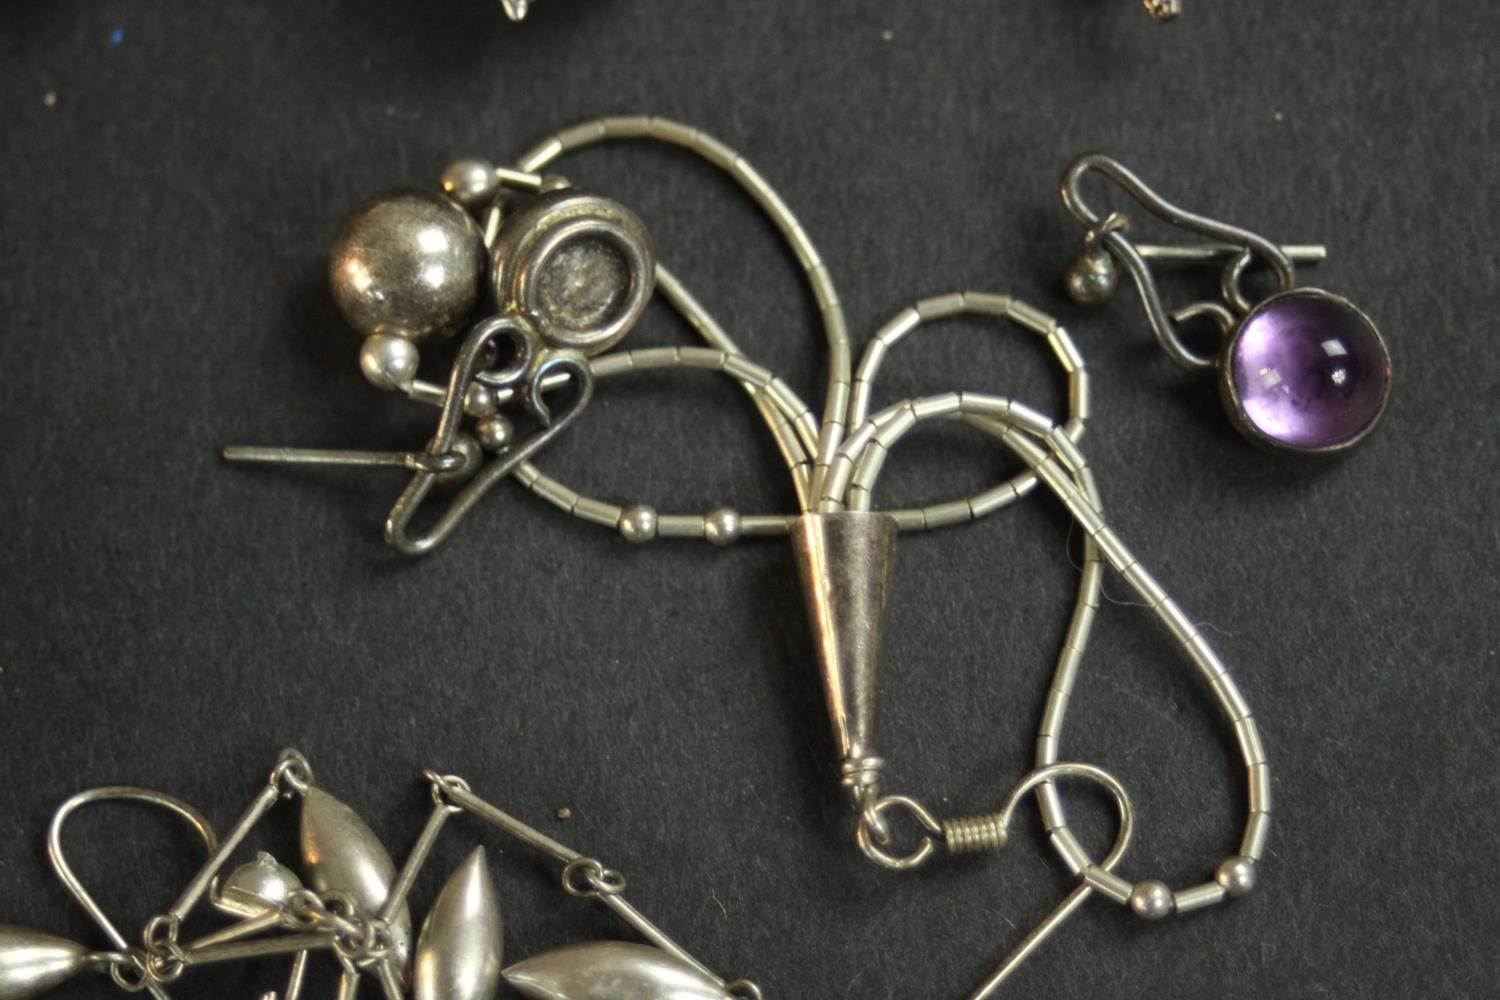 A large collection of silver and gemset jewellery, including amethyst and silver earrings, a pair of - Image 7 of 8